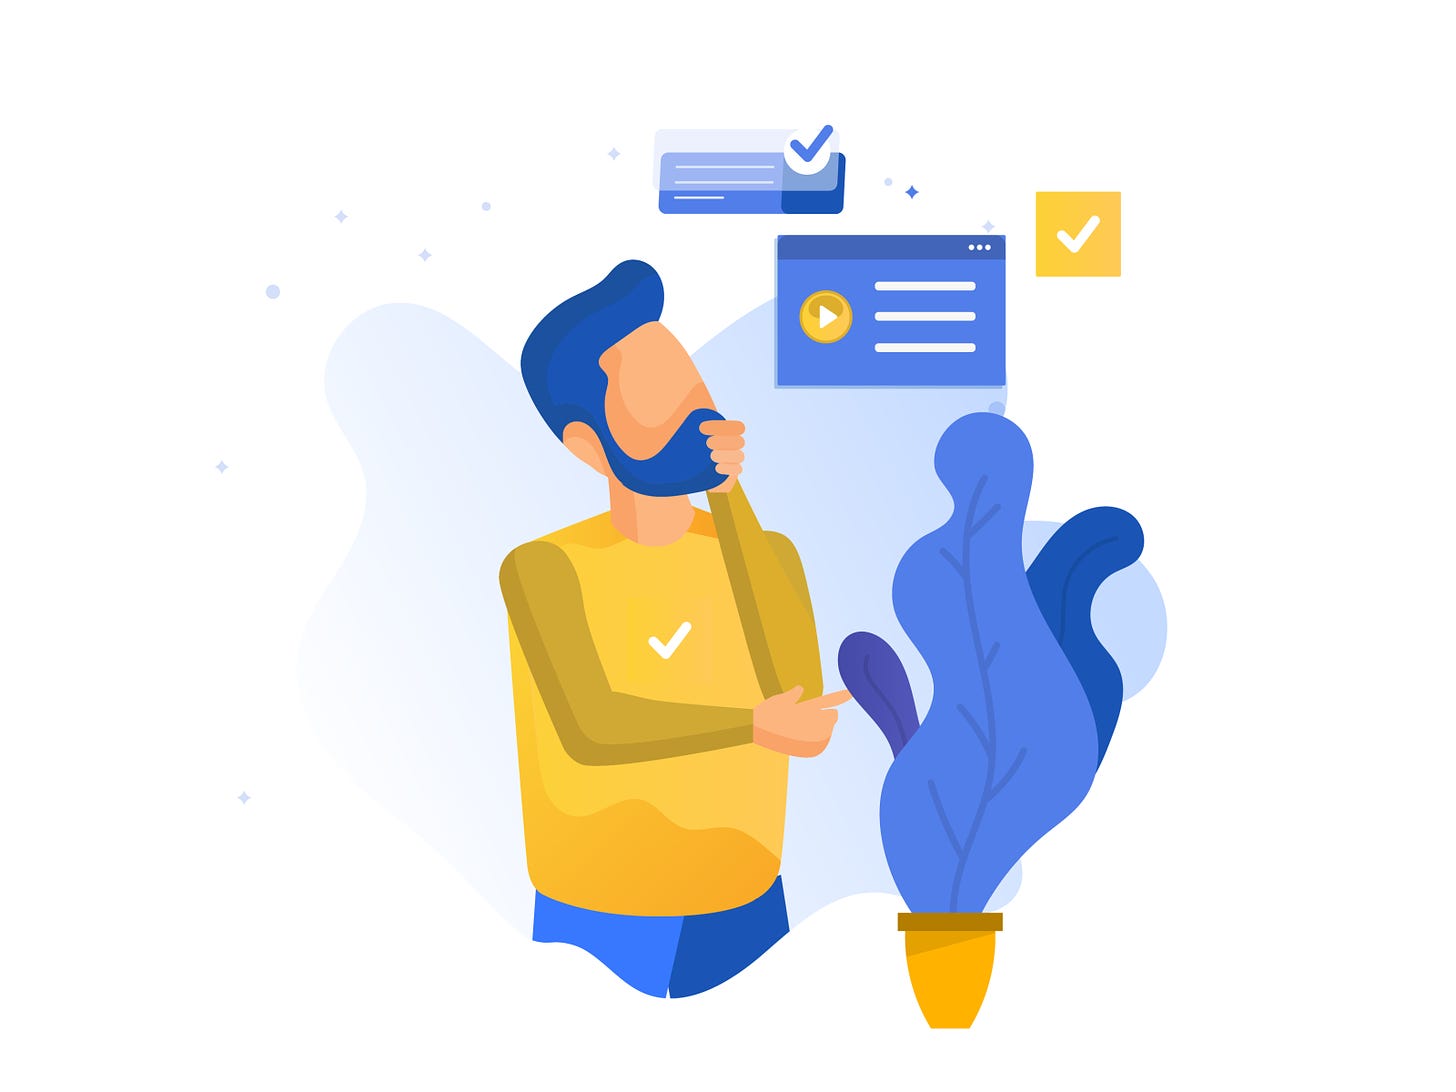 Man thinking illustration by Sanket Pal for indianpix on Dribbble